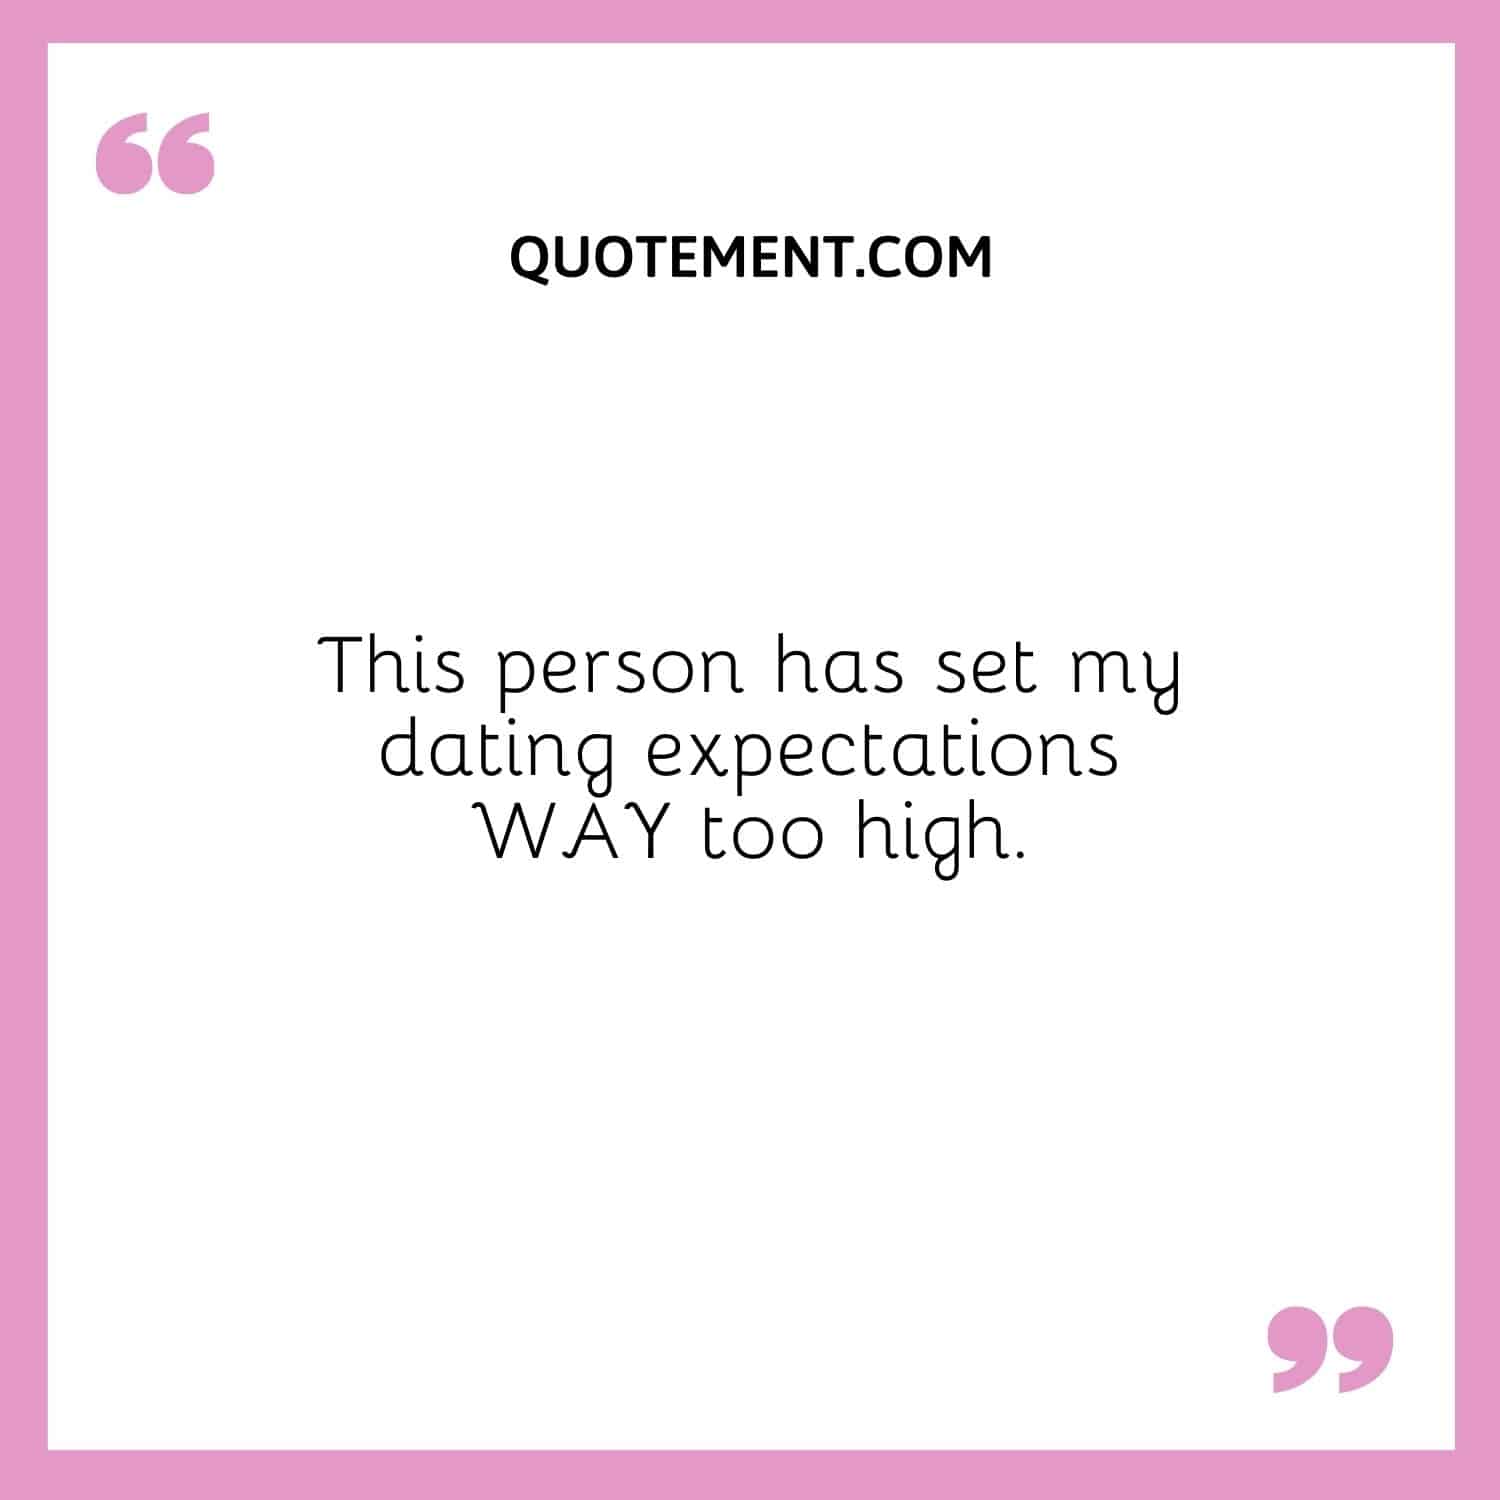 This person has set my dating expectations WAY too high